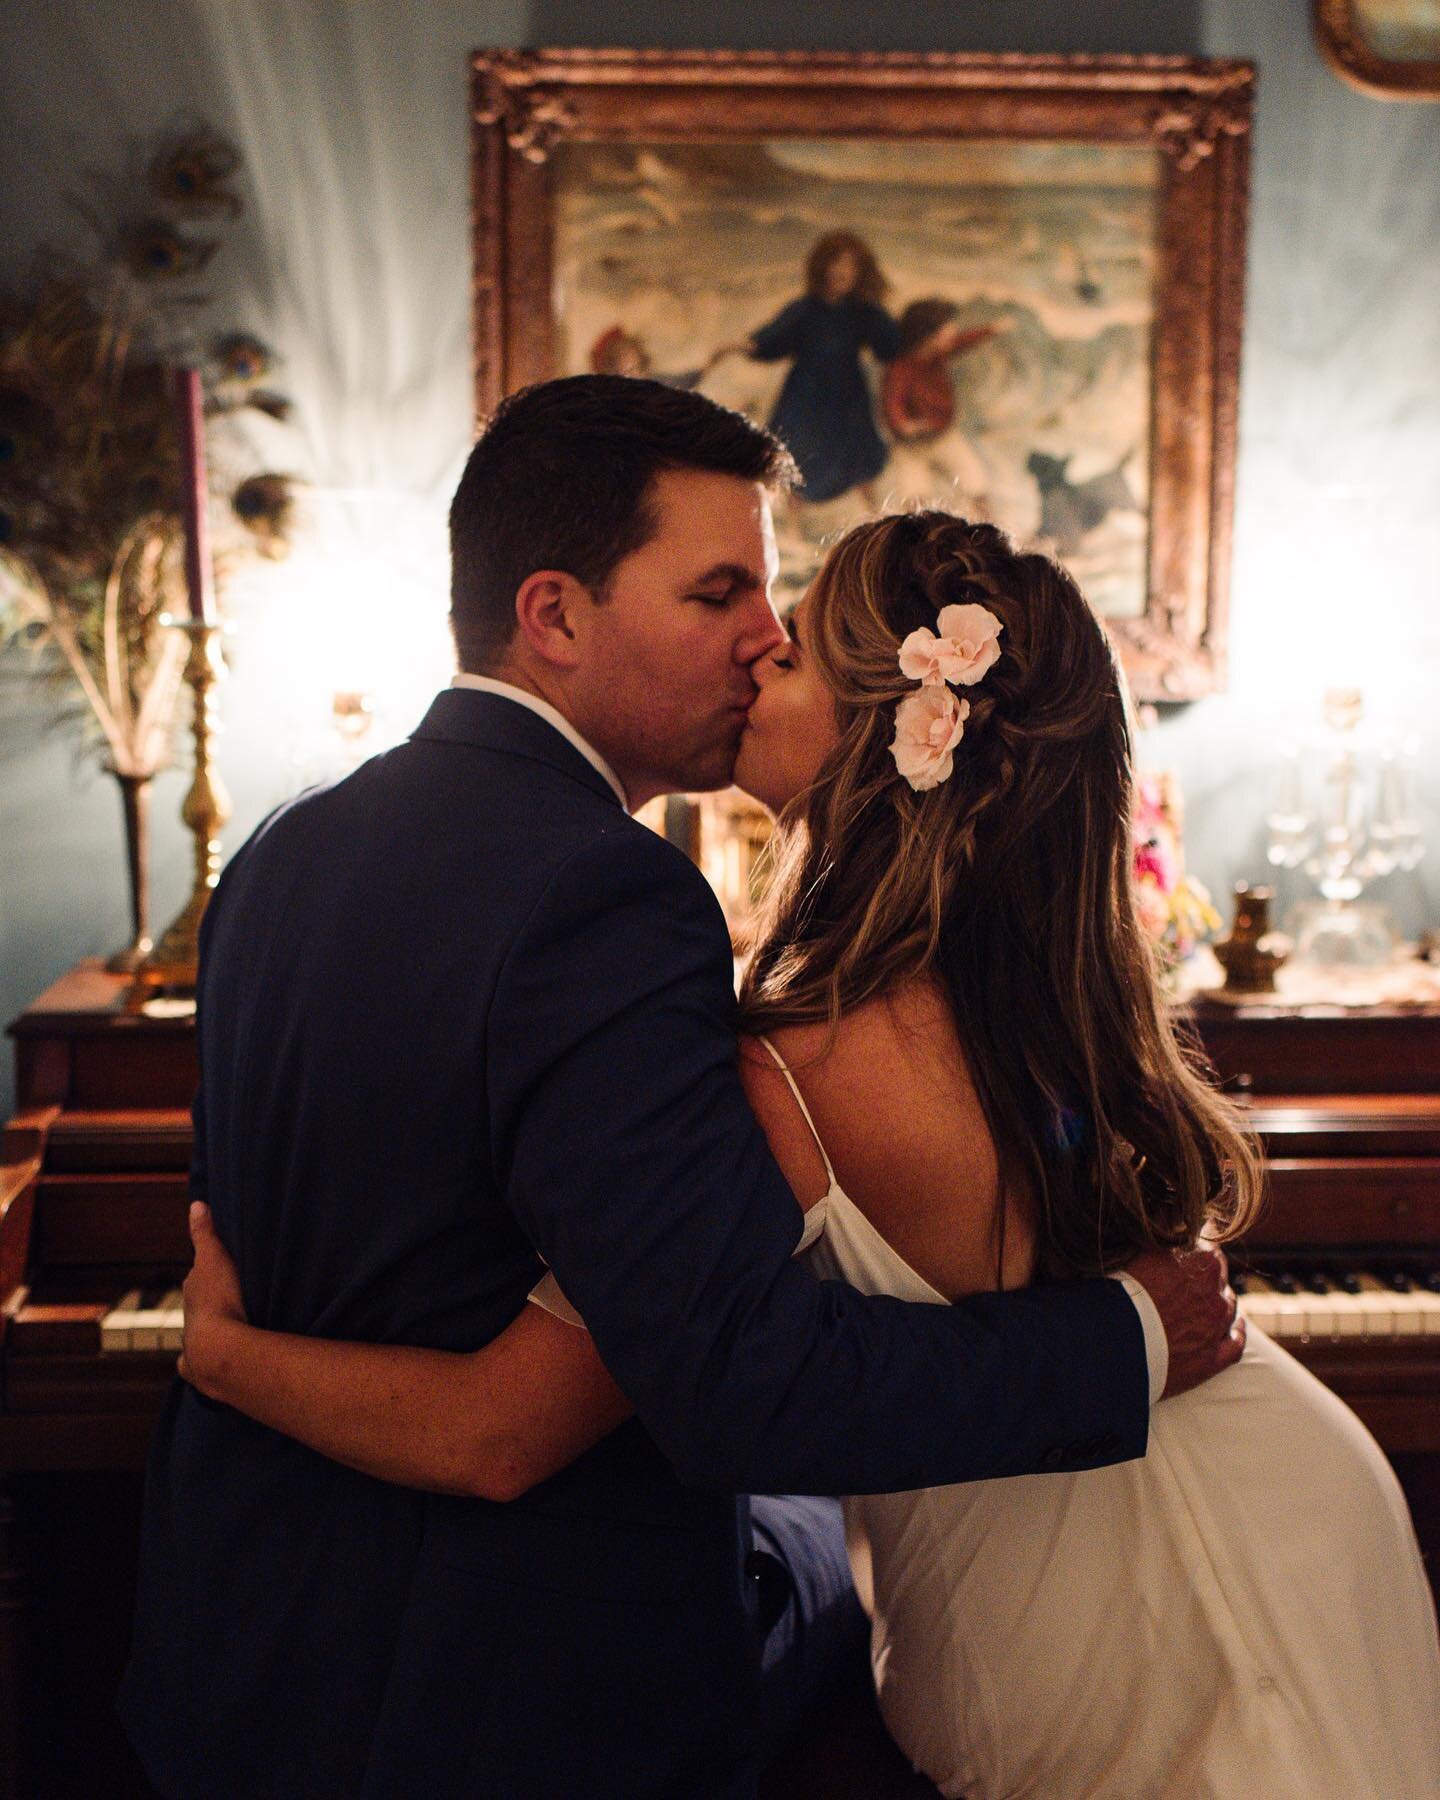 Nell &amp; Brian kissing by the piano in her childhood home. I love when moments like this happen on a wedding day. 
✨
✨
✨
✨
Photographer: @julialuckett
Venue: Private Residence
Wedding Planner: @weddingplanningplus&nbsp;
Florals: @bountiful_blooms
Caterer: @Nicolesofalbany
Cake: @Coccadotts
Beauty: @this_girl_kyle
Tent &amp; Rentals: @RainorShineTentCo @RusticRobin
Transportation: First Student Charter Bus
Entertainment: @New_York_Players_Band
Officiant: Peggy Becker
Rings: @WaltersHogsett
Dress: @LeanneMarshallofficial
Boutique: @EmmaandGracebridal
Shoes: BetsyJohnson
Suit: @CalvinKlein&nbsp;
Wedding Party Outfits: Bertie Gray
Lovebirds: @nellgable @brianstuenkel
#BrianFell4Nell&nbsp;
✨
✨
✨
✨
#castletononhudsonny #hudsonvalley #hudsonvalleyweddings #hudsonvalleyweddingphotographer #newyorkweddings #upstatenewyorkwedding #romanticwedding #estatewedding #estateweddings #backyardwedding #backyardweddings #weddingkiss #leannemarshall #leannemarshallbride #weddingmoments #romanticweddingd